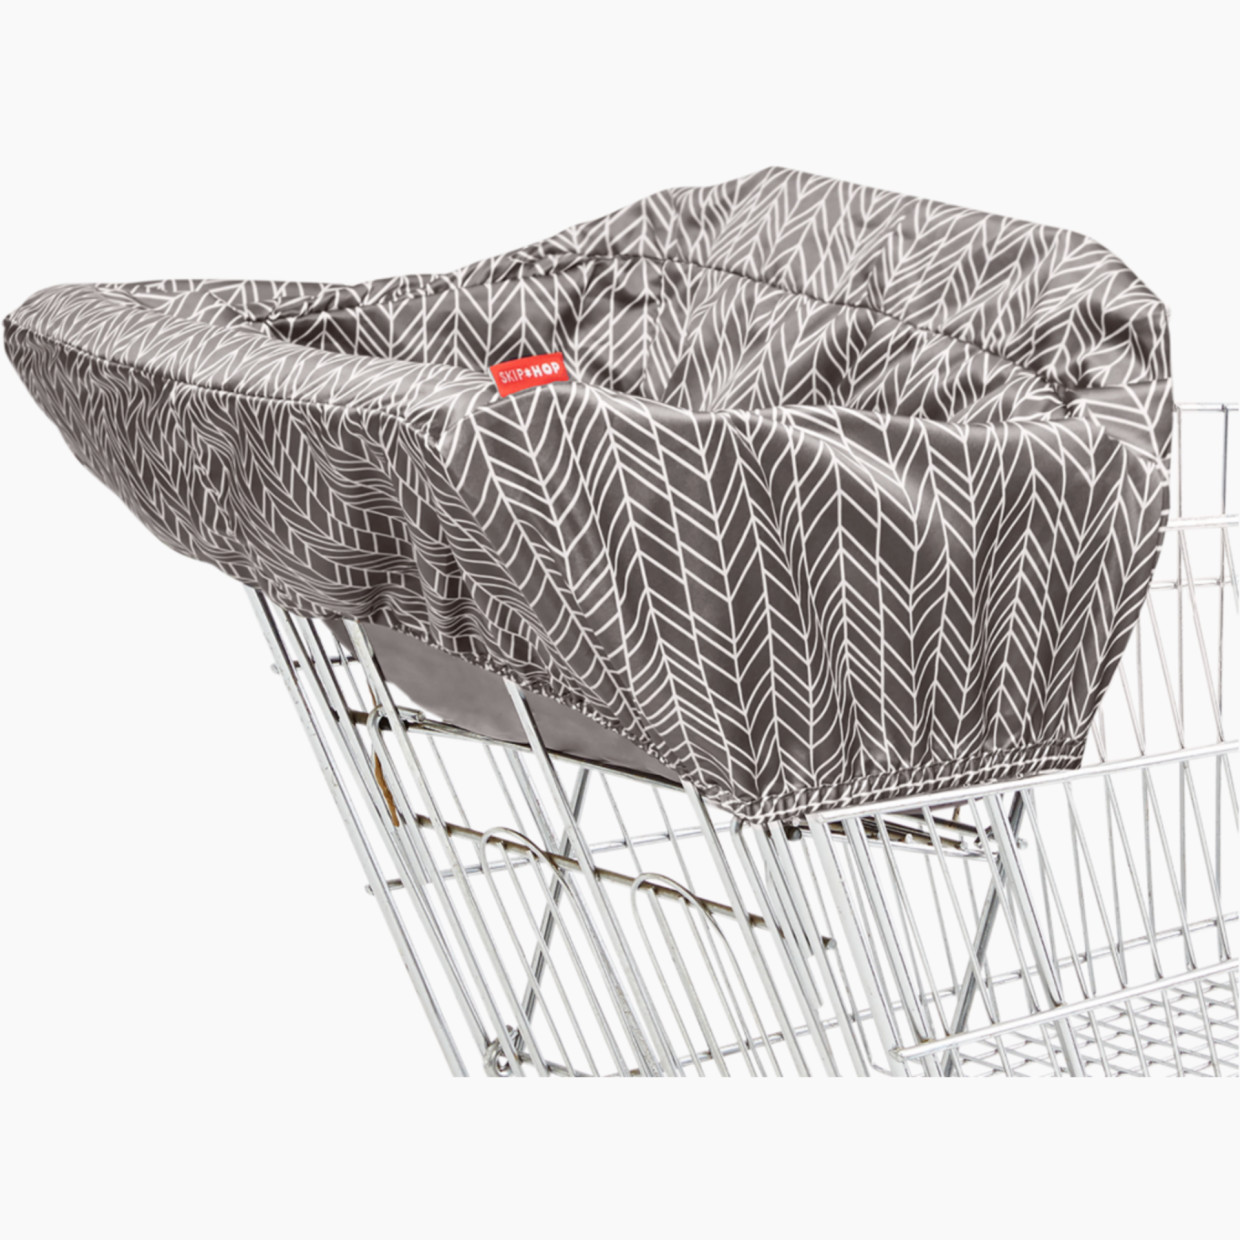 Skip Hop Take Cover Shopping Cart Cover - Grey Feather.